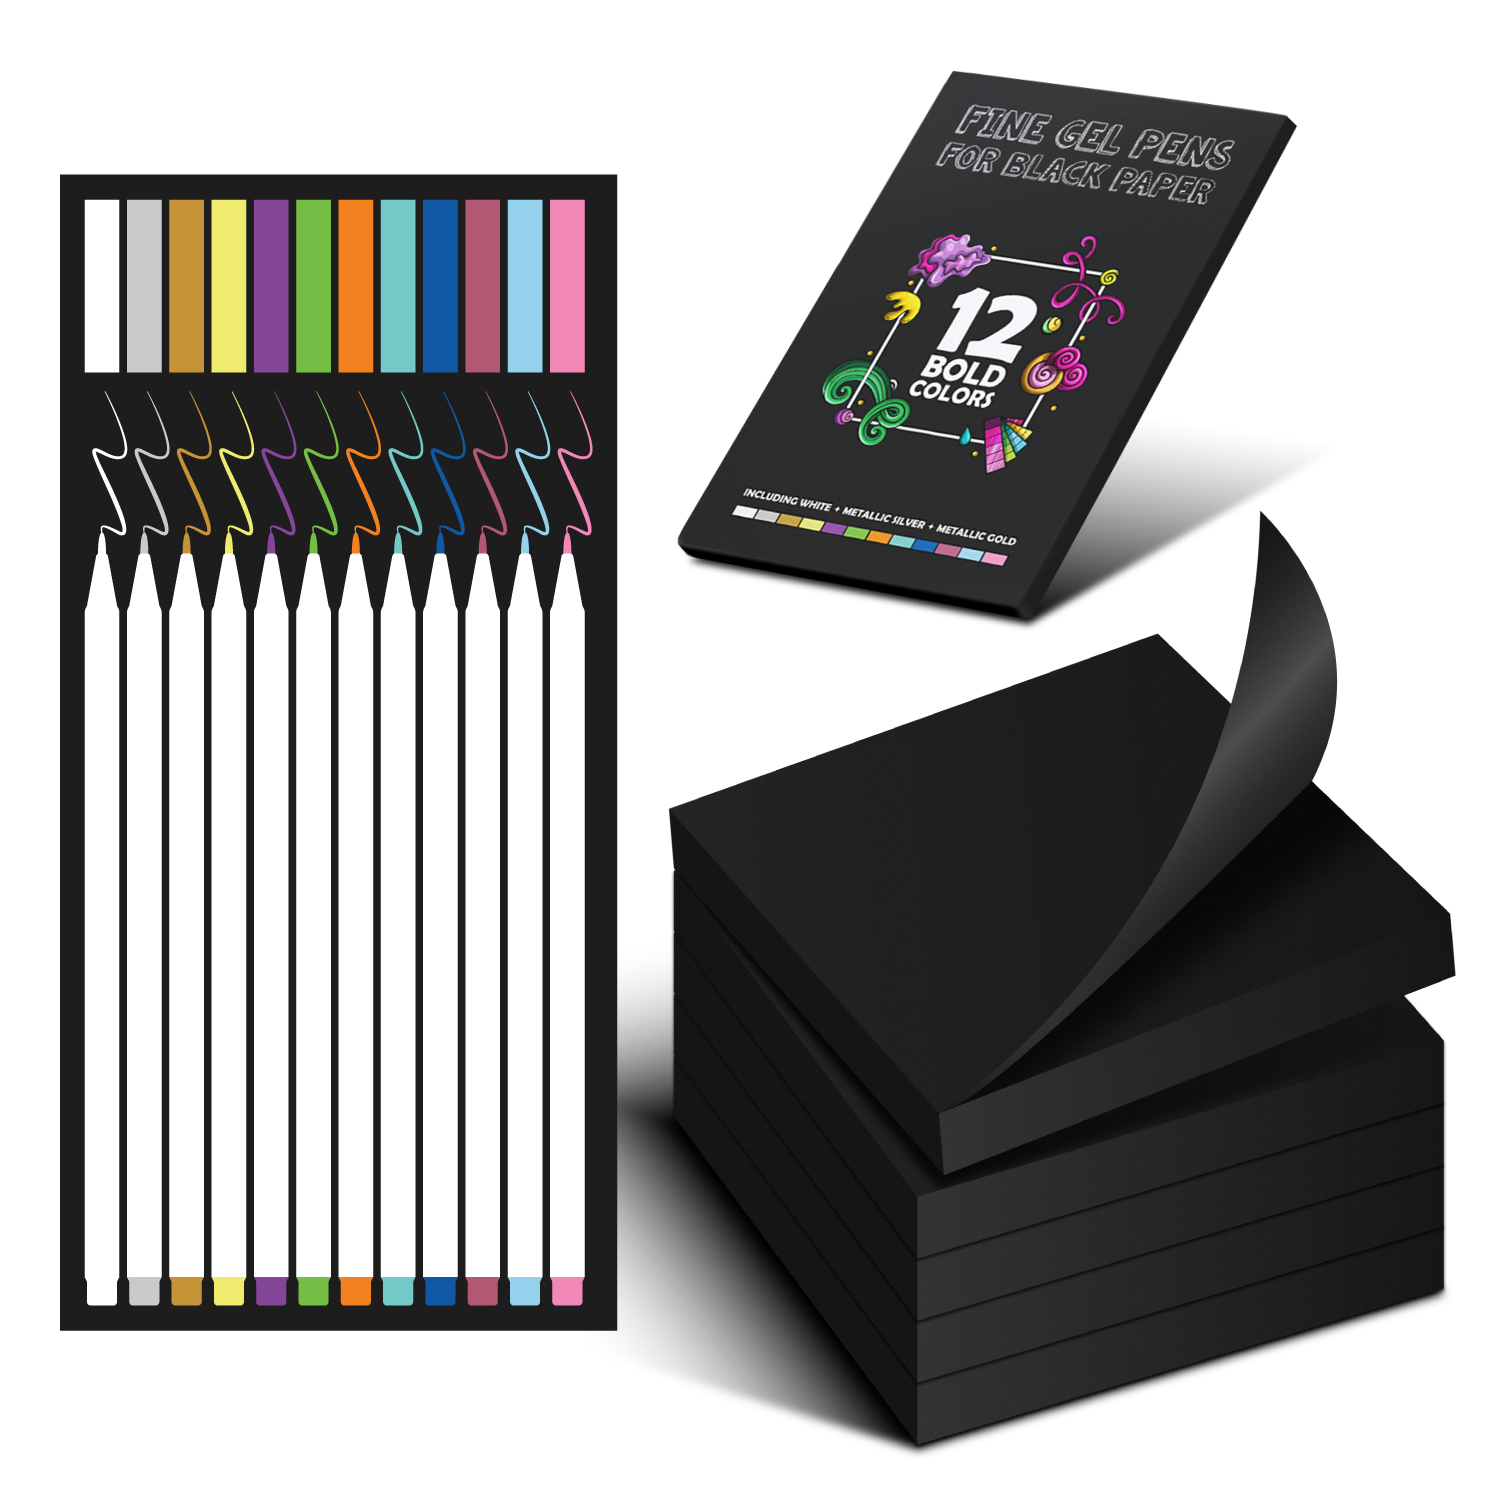 Cute Office Supplies, Black Sticky Notes and Gel Pens for Black Paper. 12  Gelly Roll Pens for Black Paper, Including White Gel Pen, Gold & Silver.  3x3 500ct, Fun Sticky Notes with